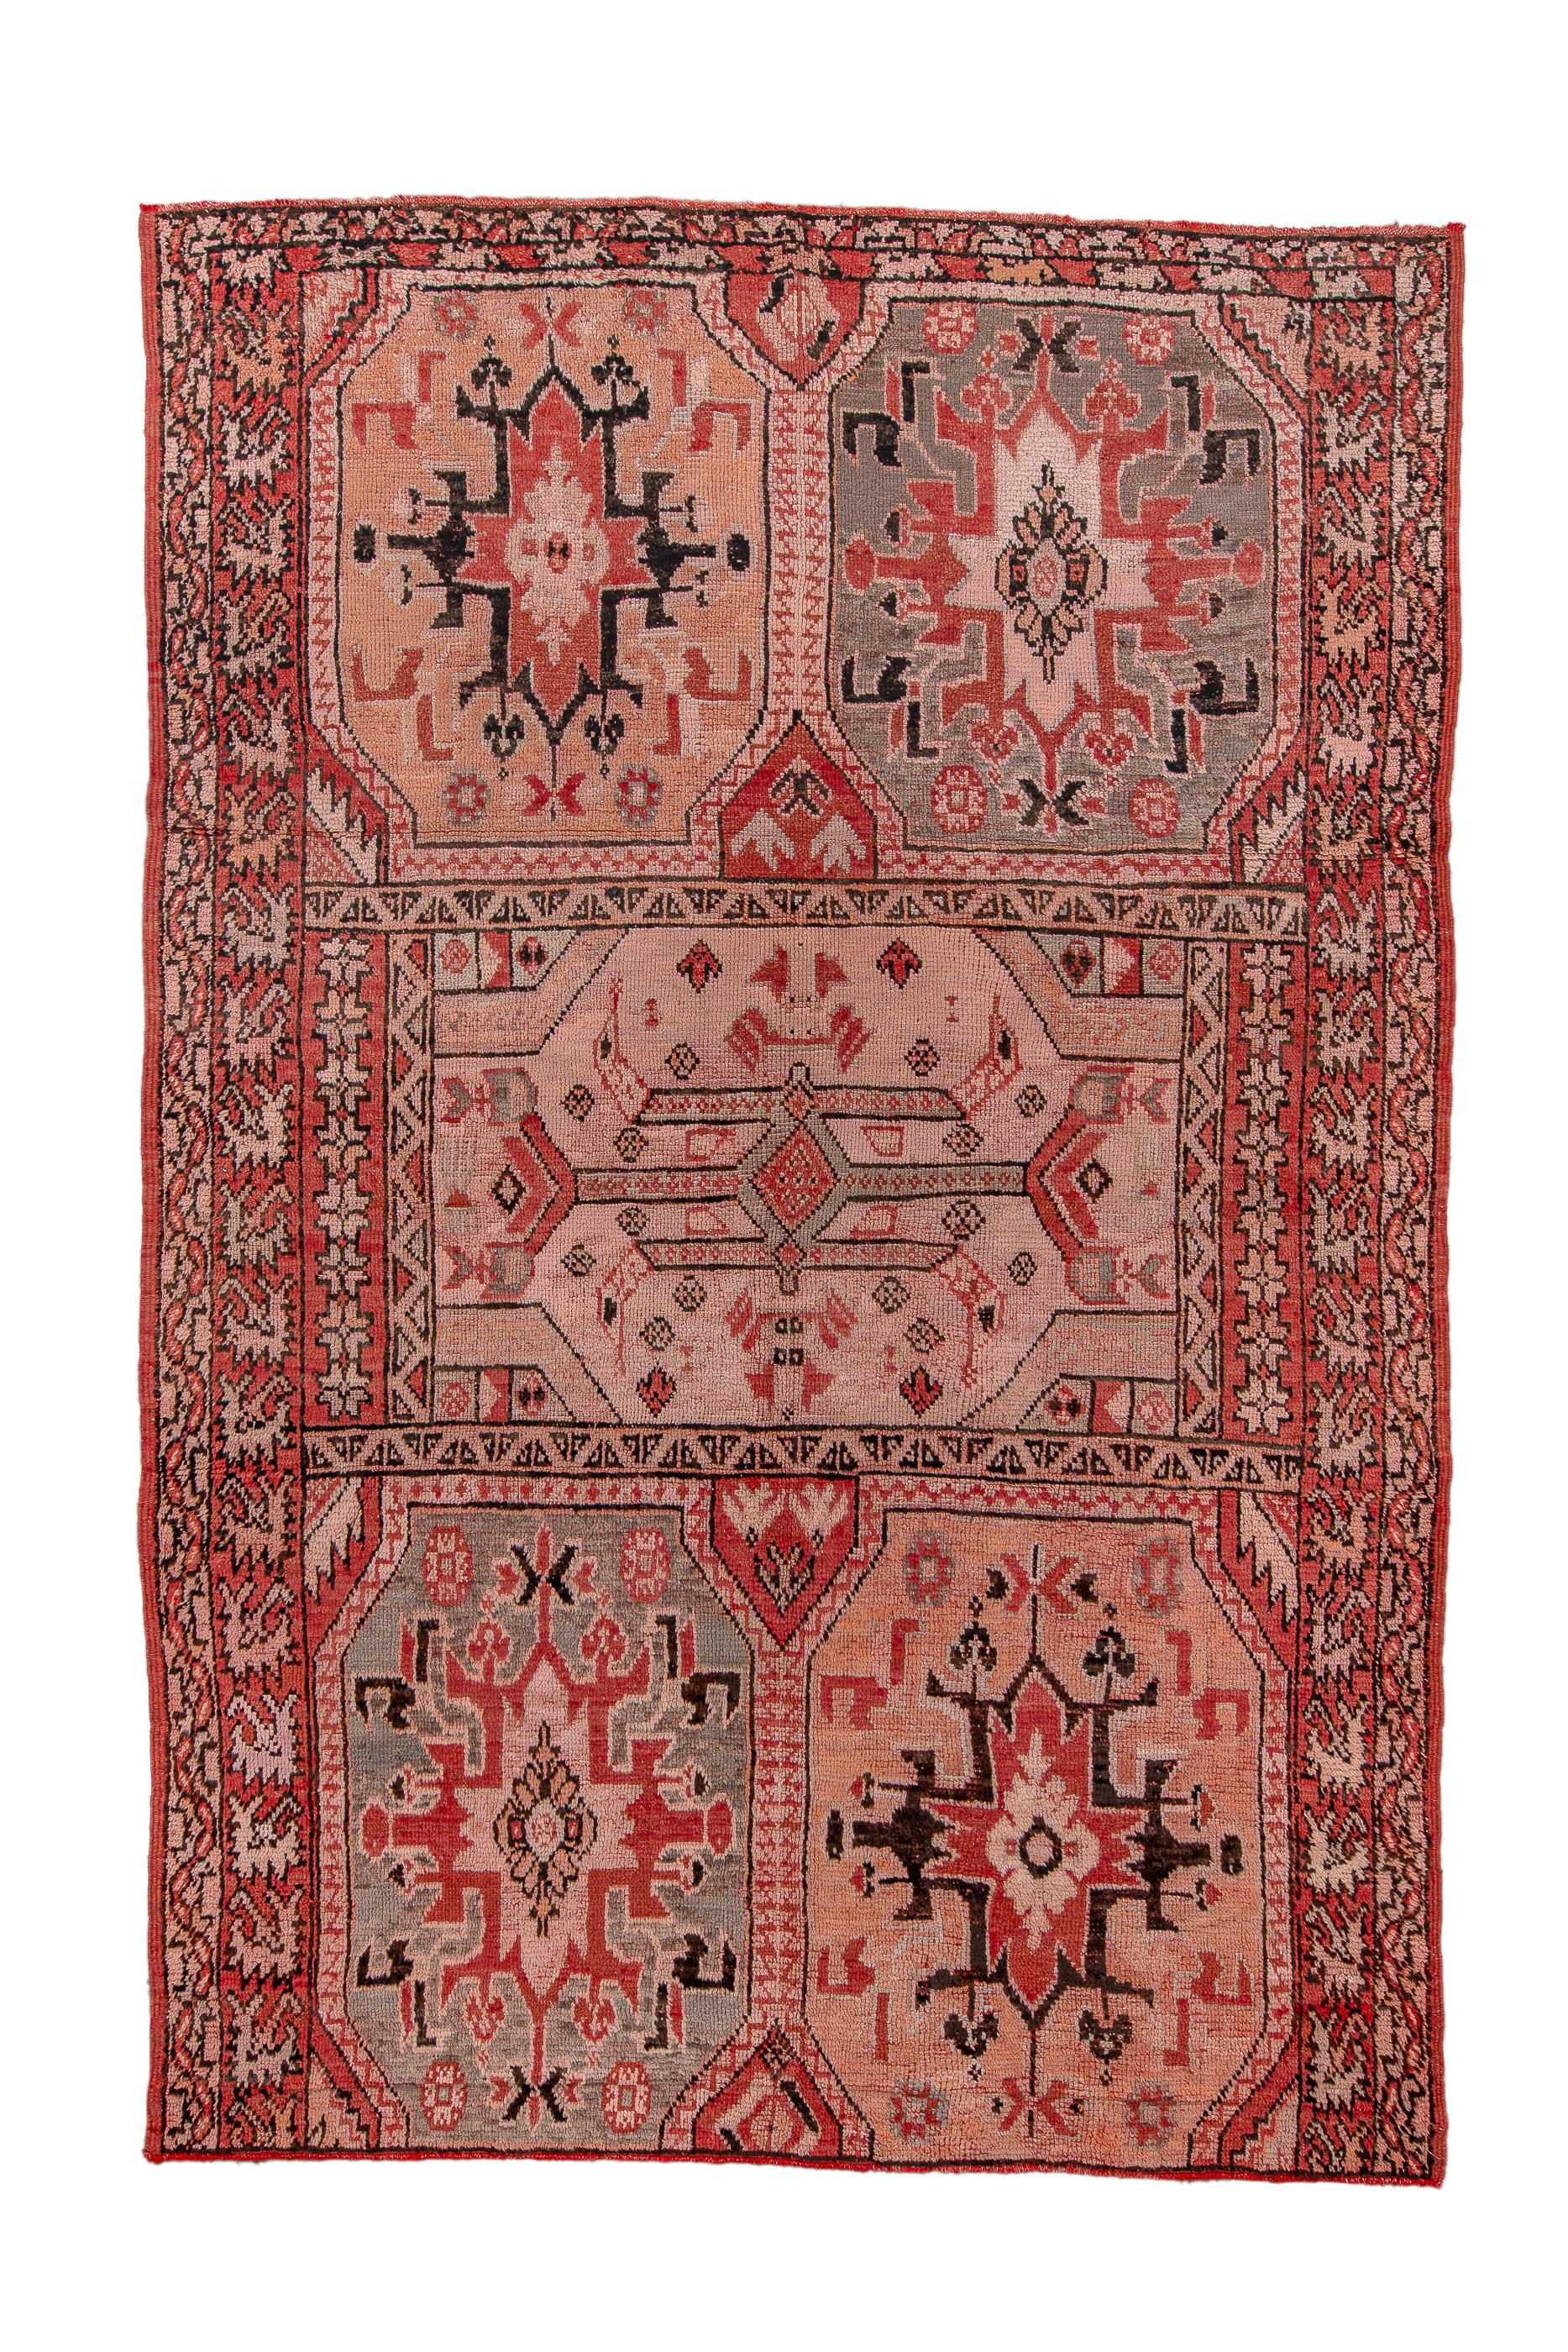  Turkish influence from the “Transylvanian” 17th century rugs is evident in the octagonal panels in straw, cream and various browns, in a 2/1/2 layout. The main red border displays floating leaves in the Anatolian Bergama style. End borders